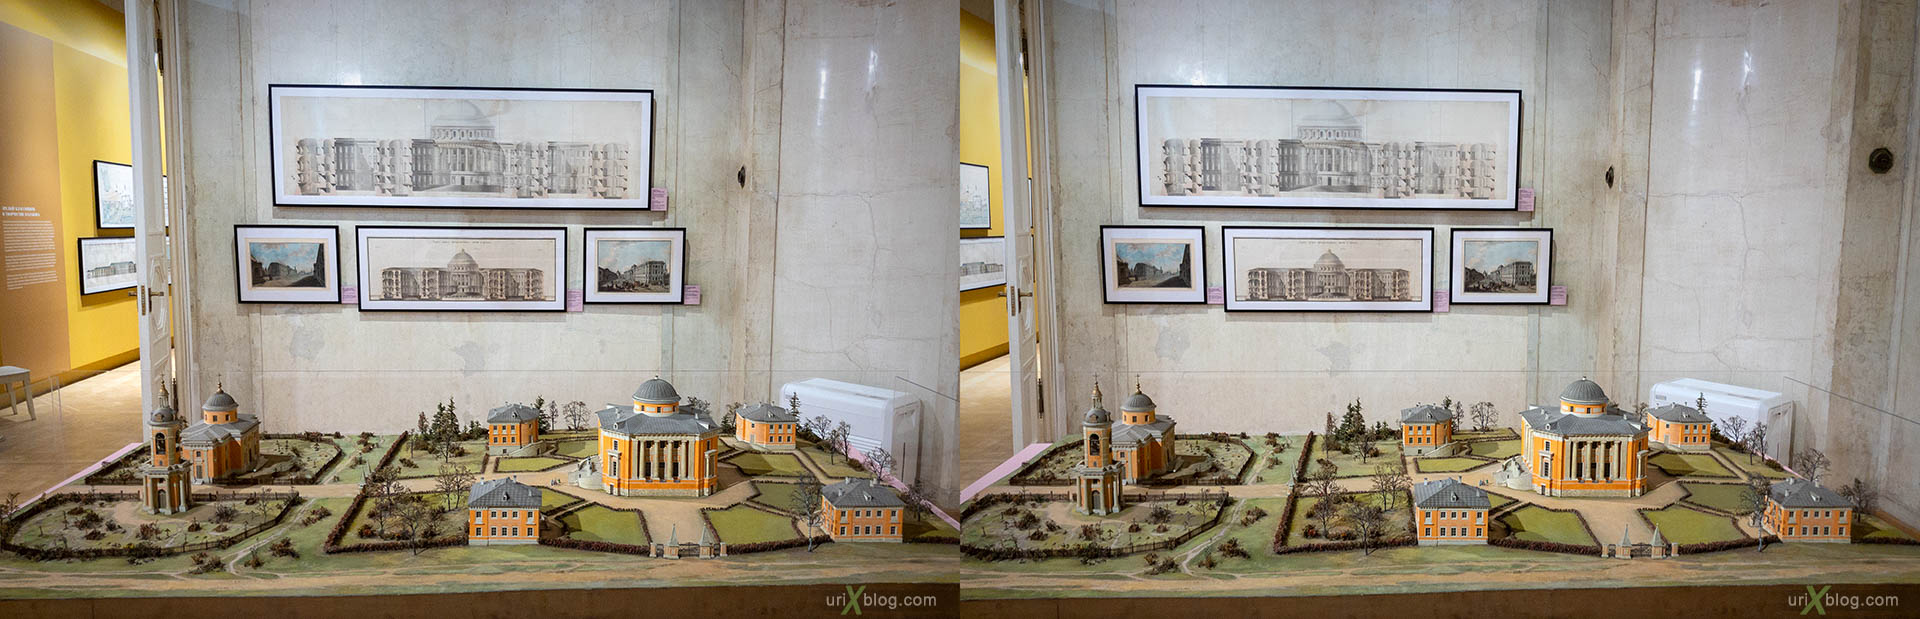 Petrovskoe-Knyazhischevo estate, museum, architecture museum, Moscow, Russia, 3D, stereo pair, cross-eyed, crossview, cross view stereo pair, stereoscopic, 2018